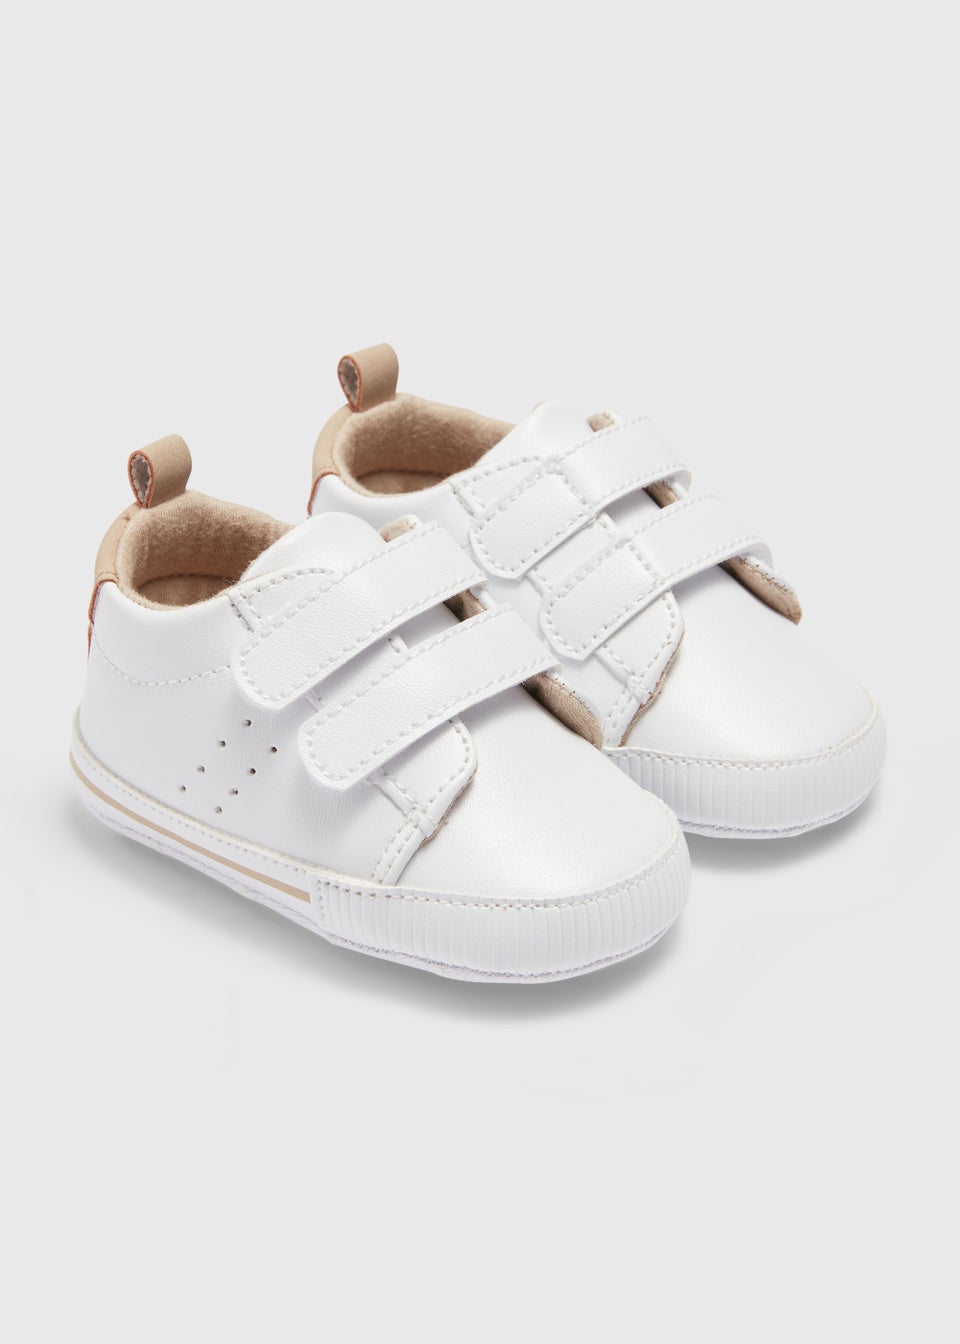 White Double Strap Soft Sole Baby Shoes (Newborn-18mths)